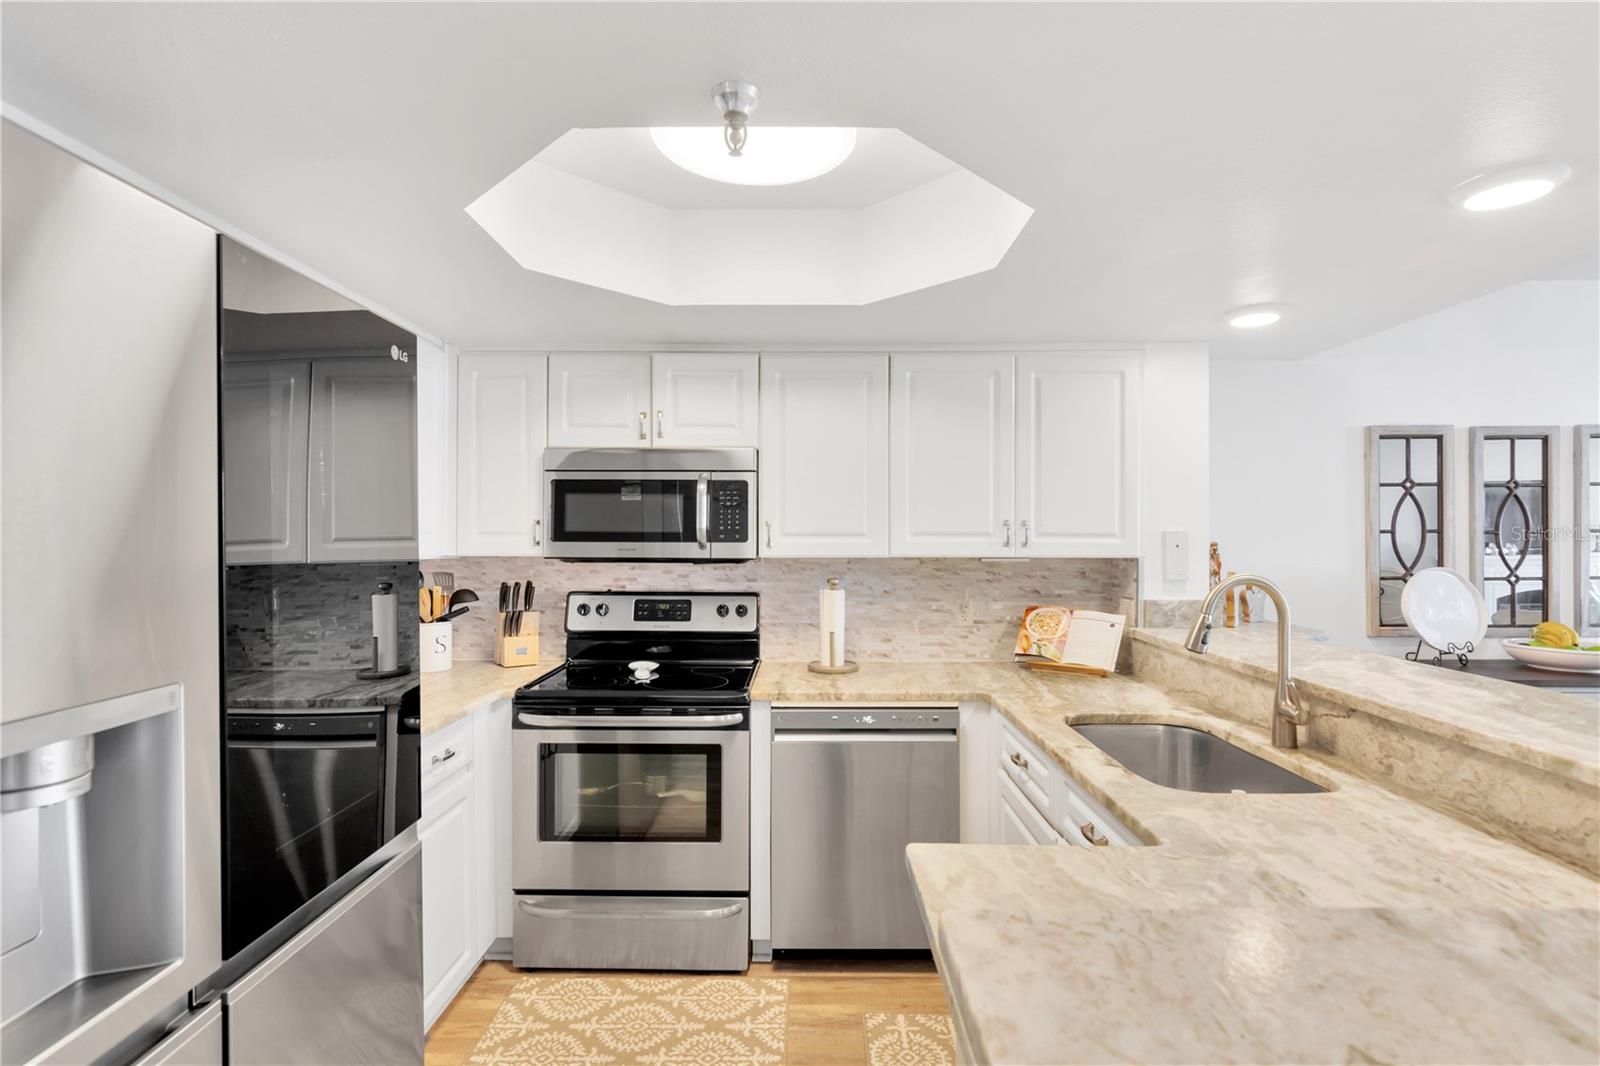 Notice the beautiful detailing with your designer lighting, expansive countertops and modern cabinetry.